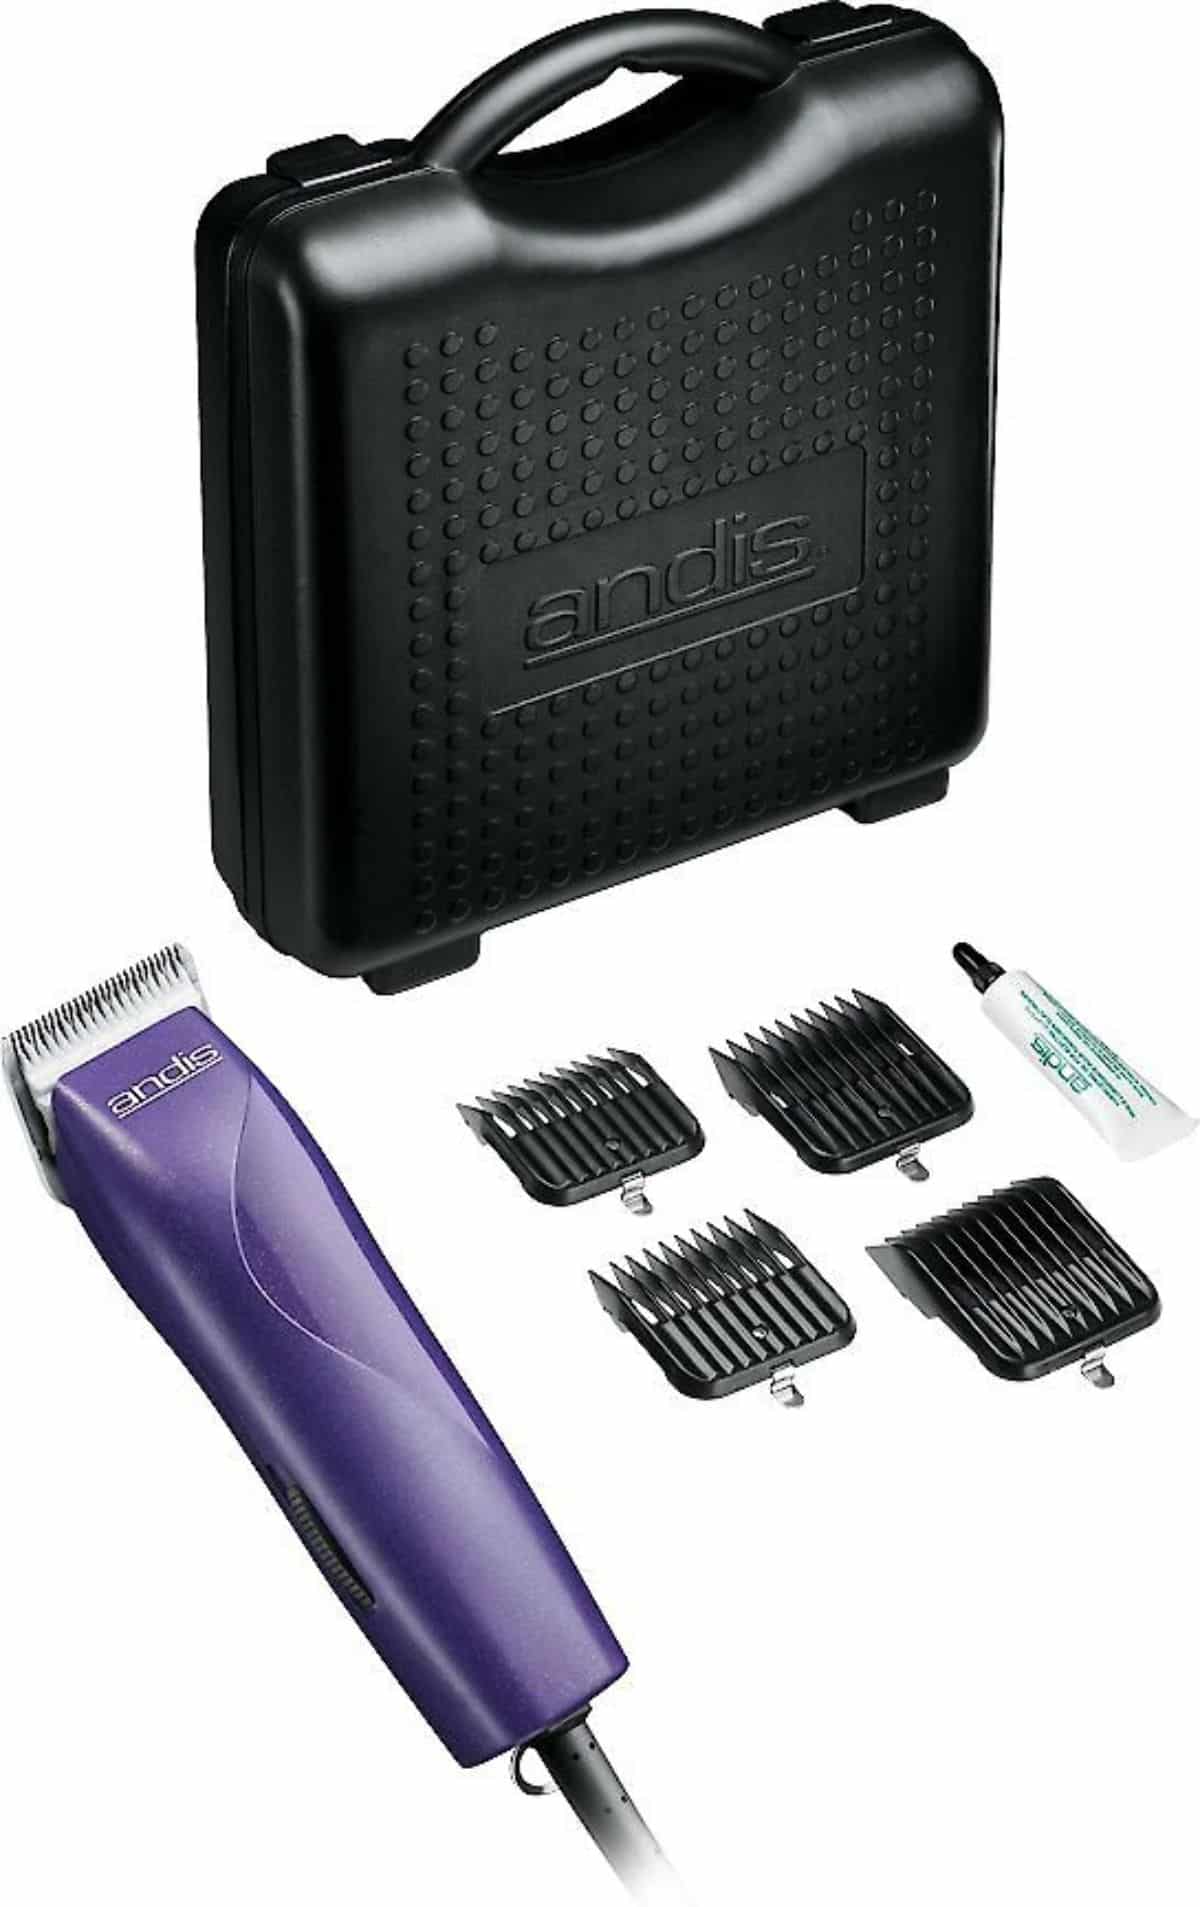 Andis Pro-Animal Clipper Kit